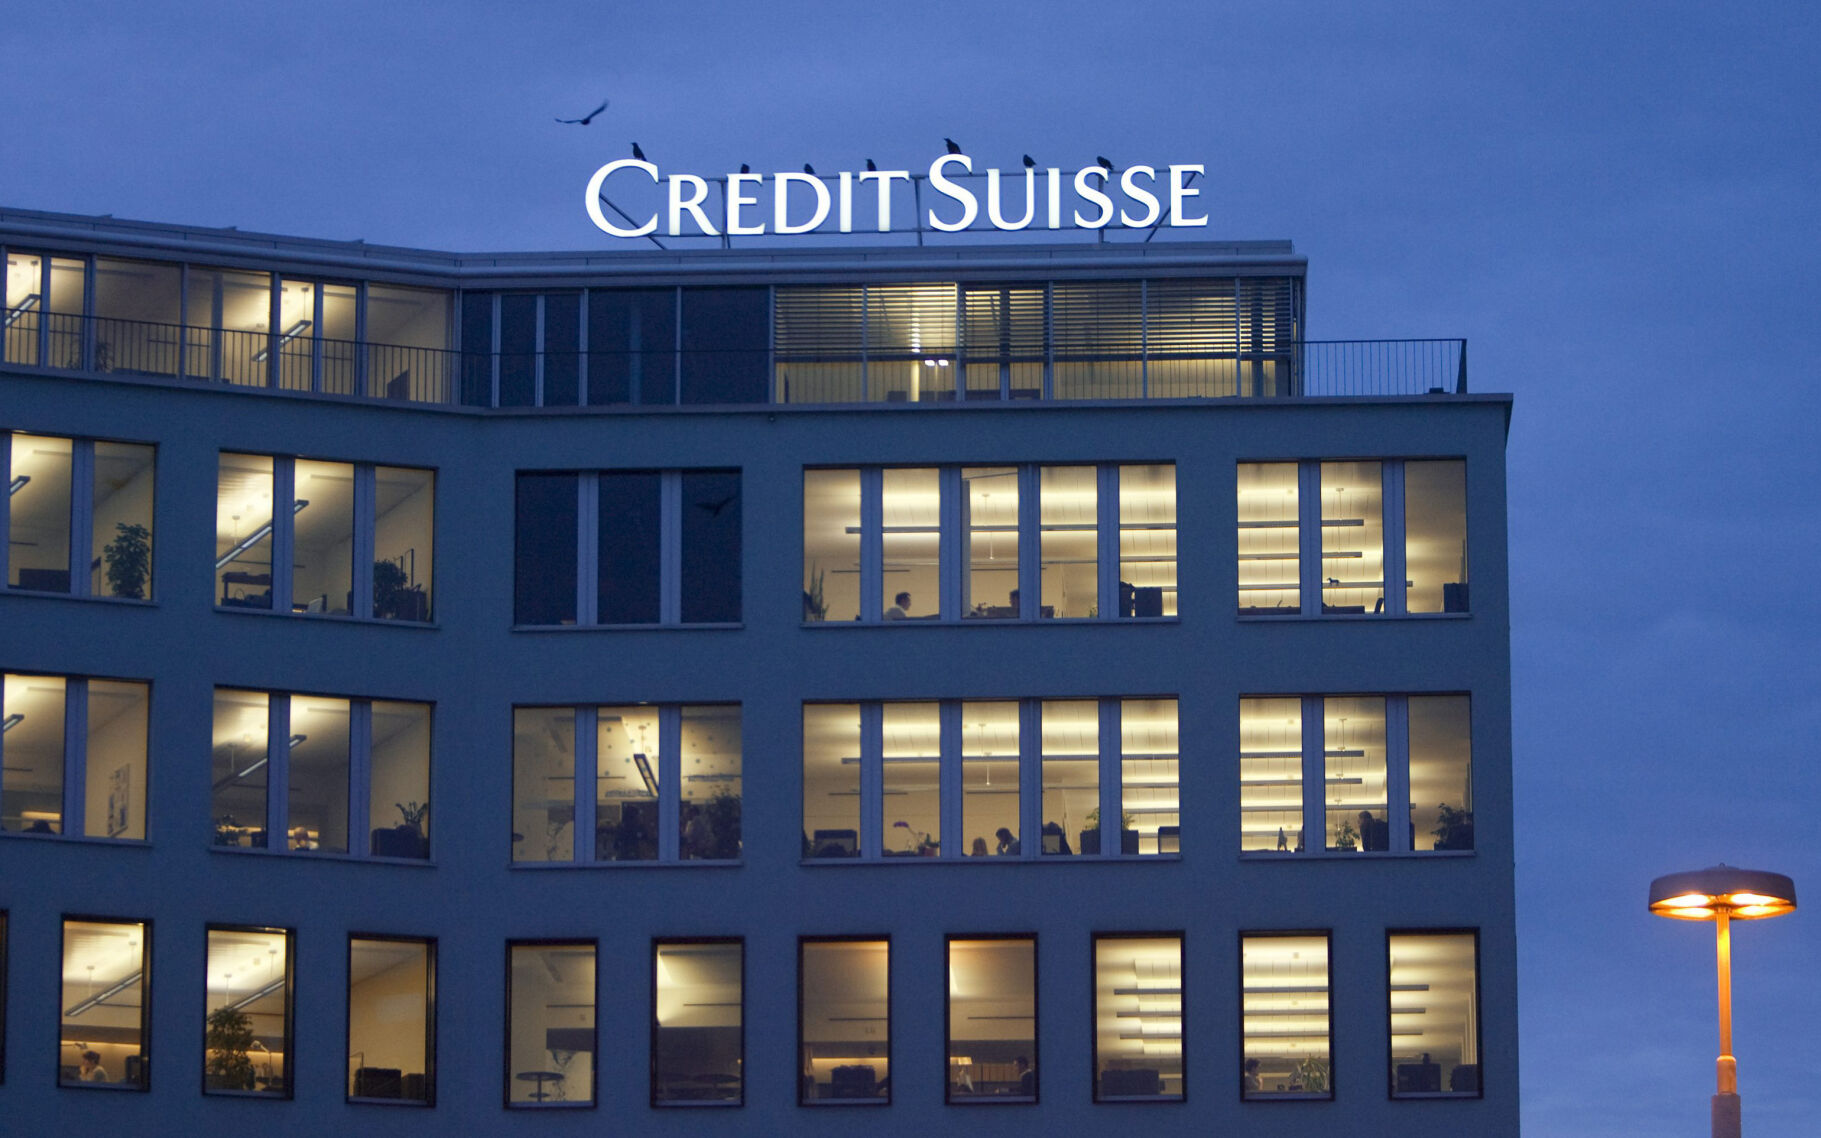 <p>FILE- The logo of Credit Suisse is seen at a building in the Brunau quarters in Zurich, Switzerland, Tuesday, Dec. 9, 2008. Swiss banking giant Credit Suisse has agreed to pay the French government 238 million euros in a tax fraud settlement deal announced Monday. (AP Photo/Keystone, Gaetan Bally, File)</p>   PHOTO CREDIT: Gaetan Bally - foreign subscriber, KEYSTONE